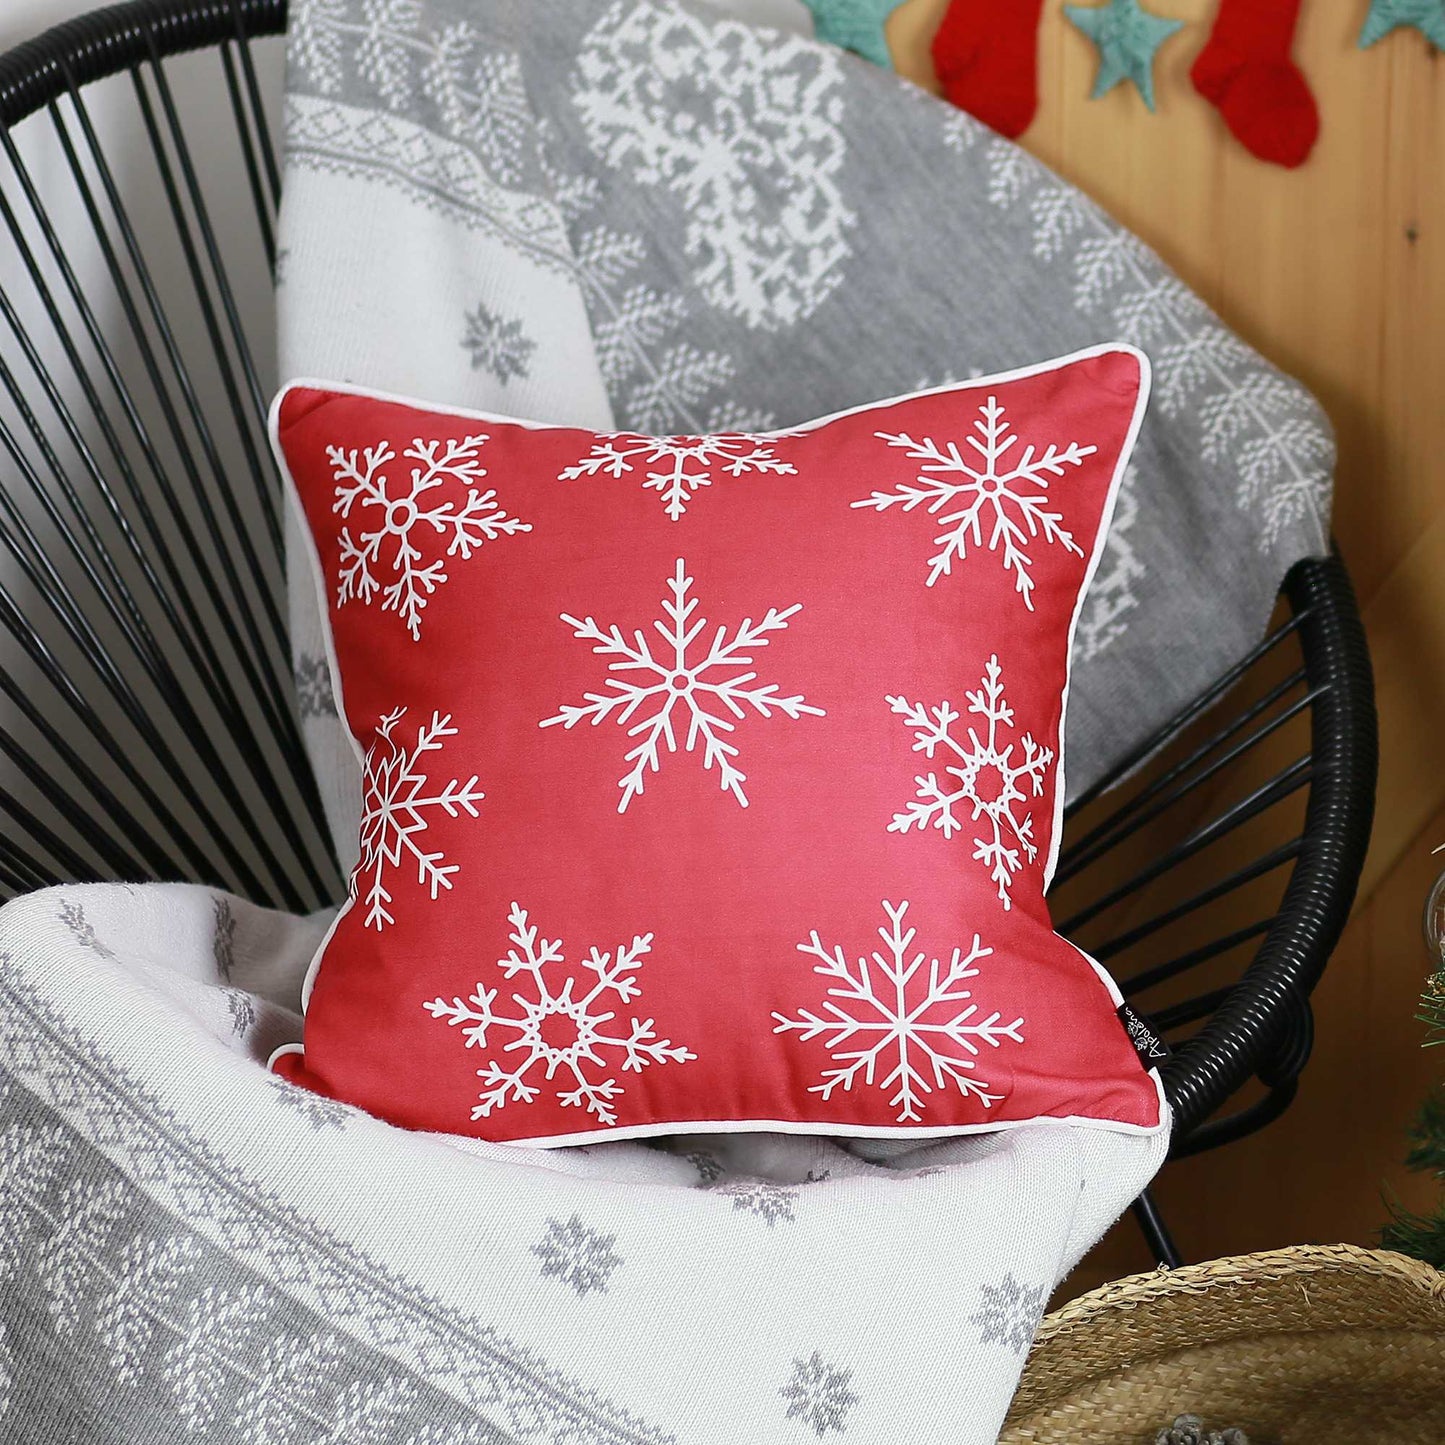 18"x18" Red Snowflakes Christmas Decorative Throw Pillow Cover